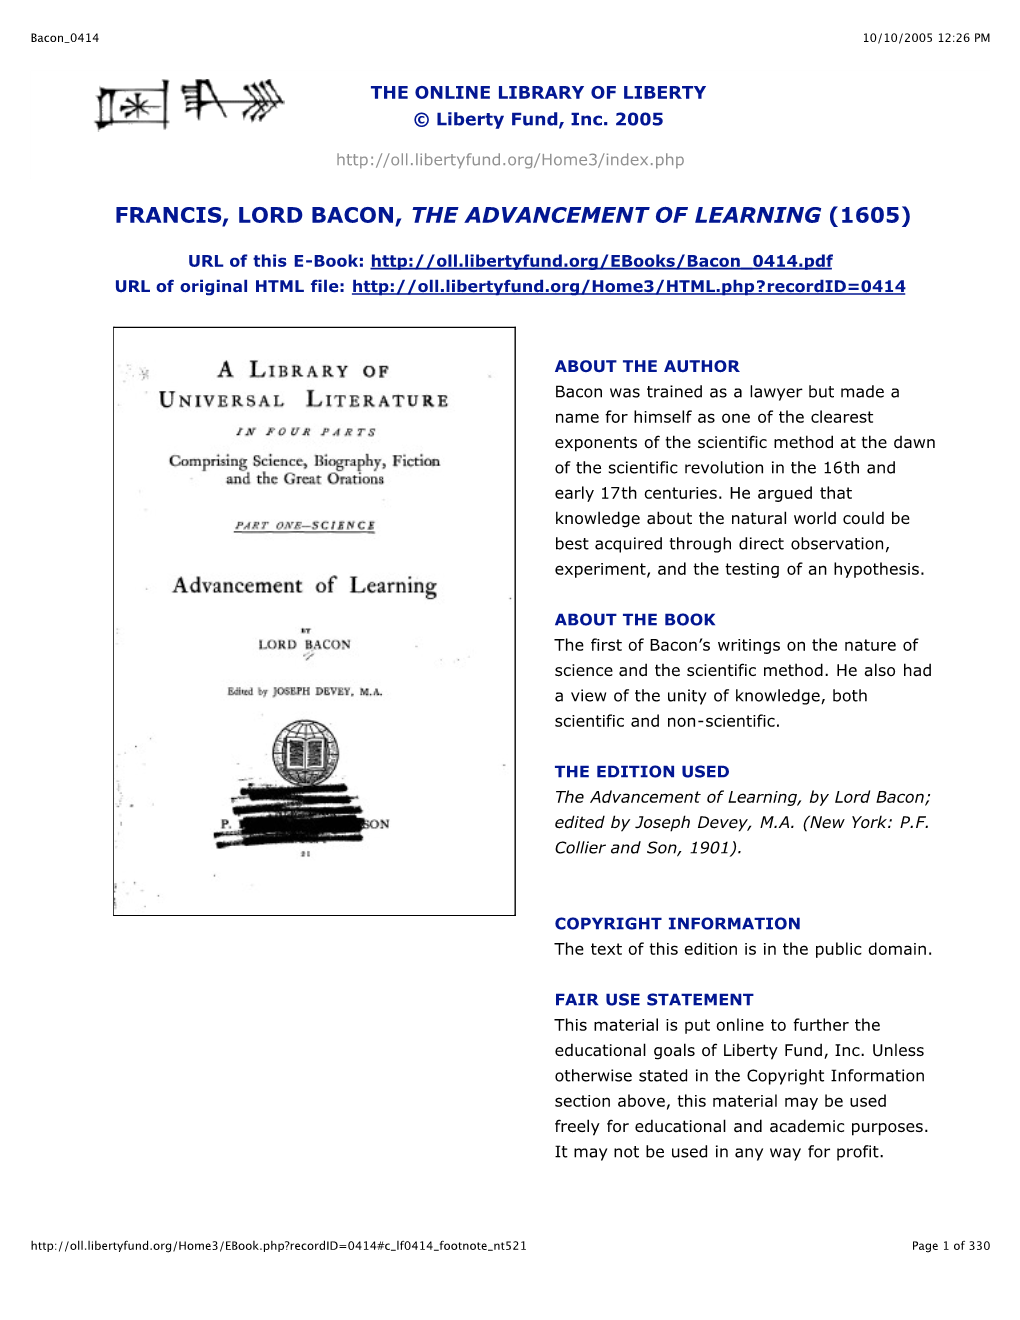 Francis, Lord Bacon, the Advancement of Learning (1605)